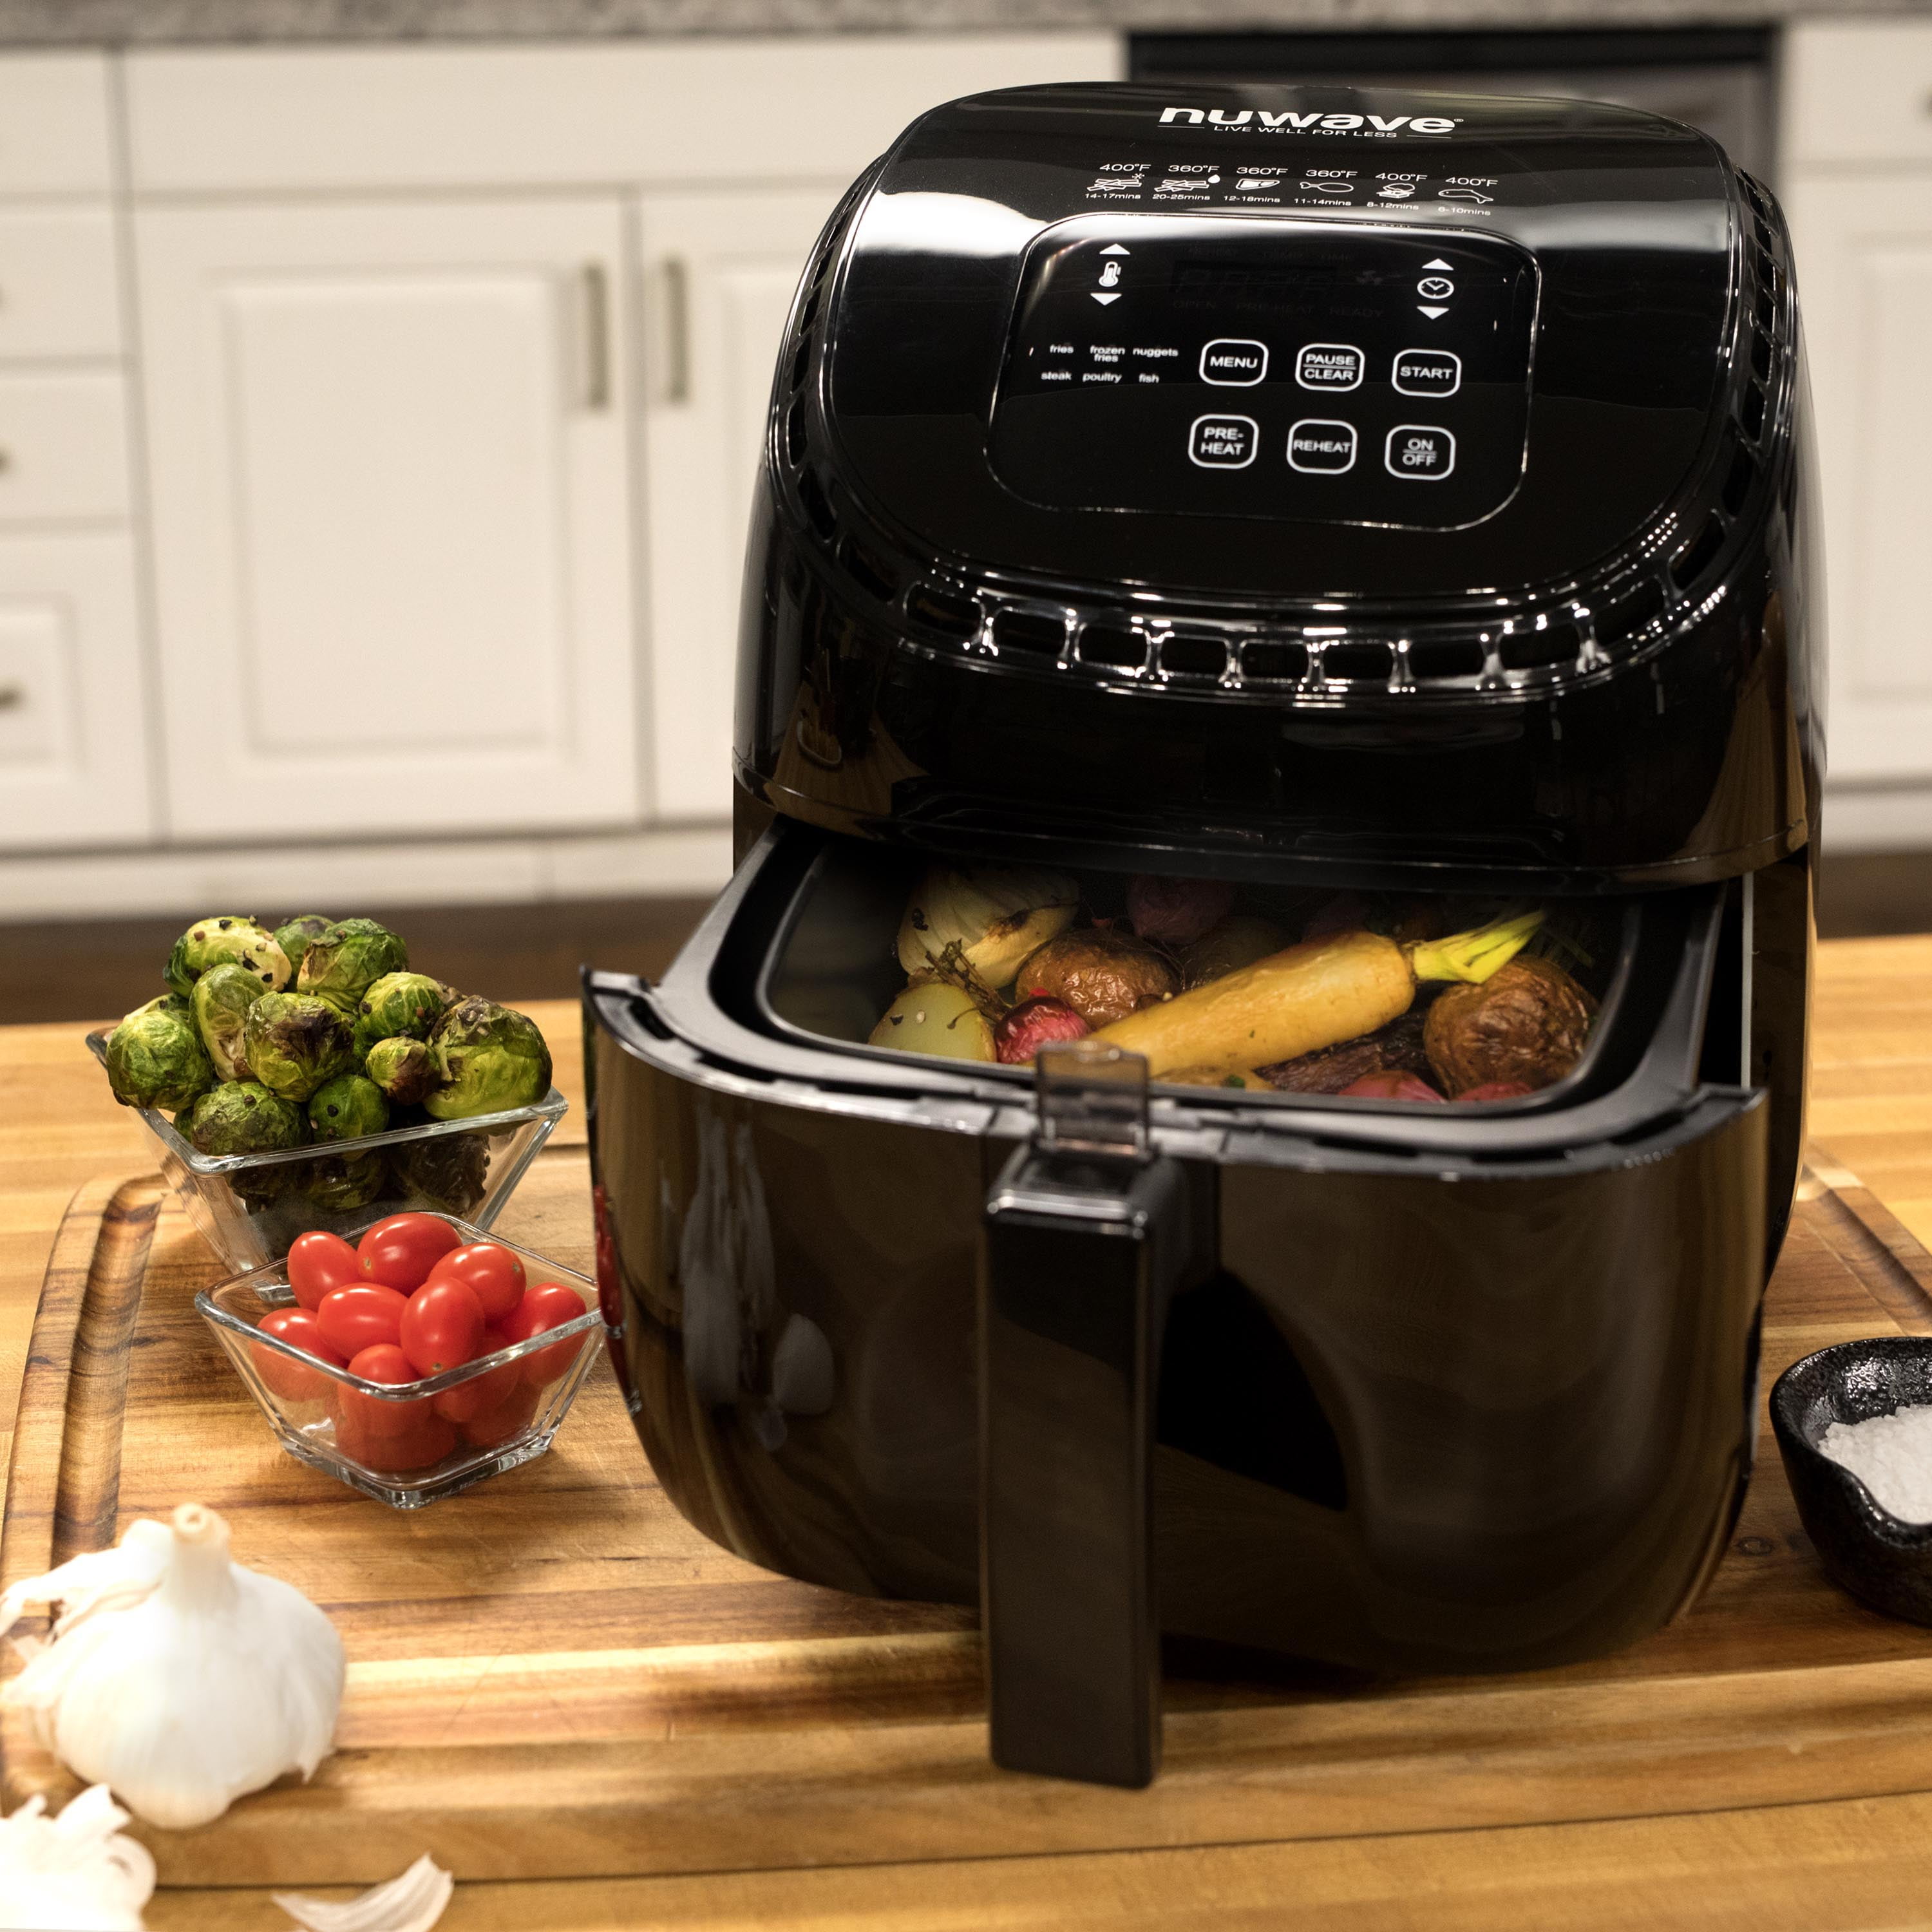 precise temperature control REHEAT and more wattage control 6 easy presets recipe book also includes non-stick baking pan and s NUWAVE BRIO 3-Quart Digital Air Fryer cooking package with one-touch digital controls and advanced functions like PREHEAT 